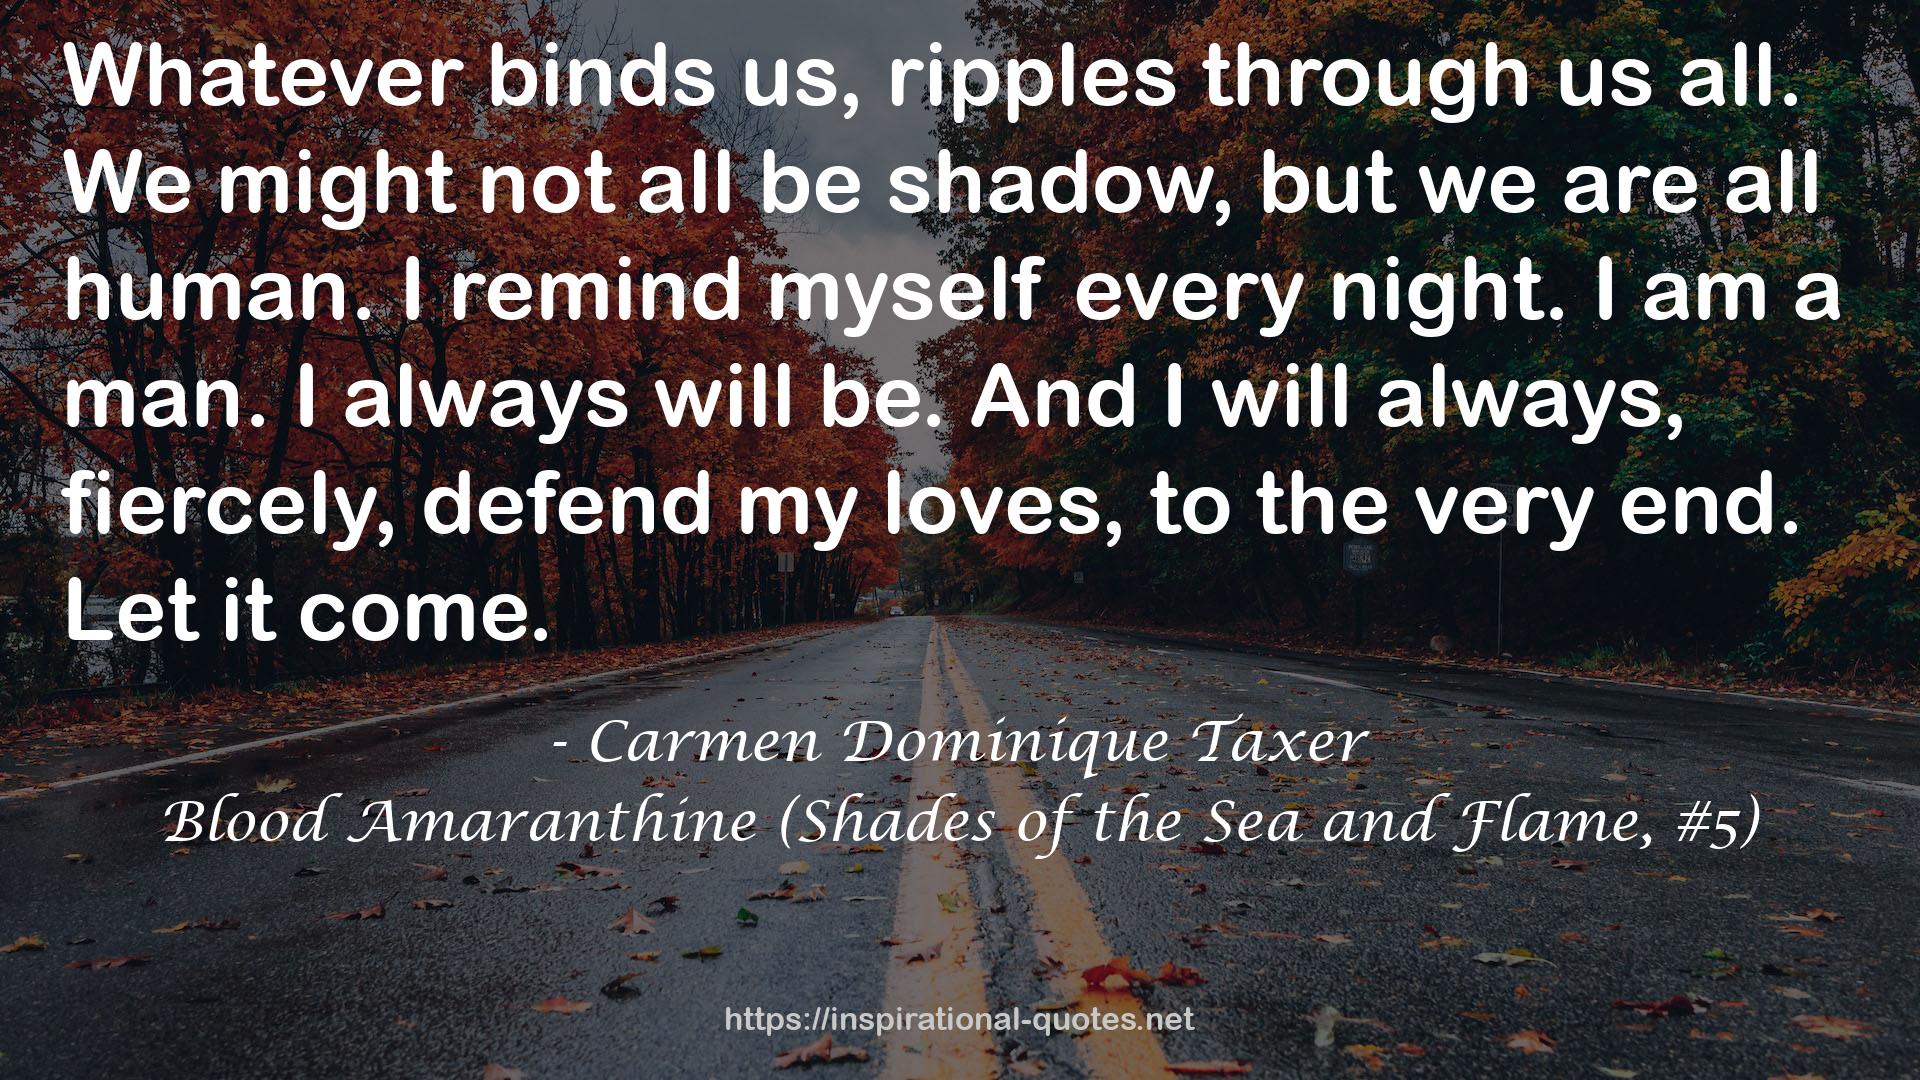 Blood Amaranthine (Shades of the Sea and Flame, #5) QUOTES